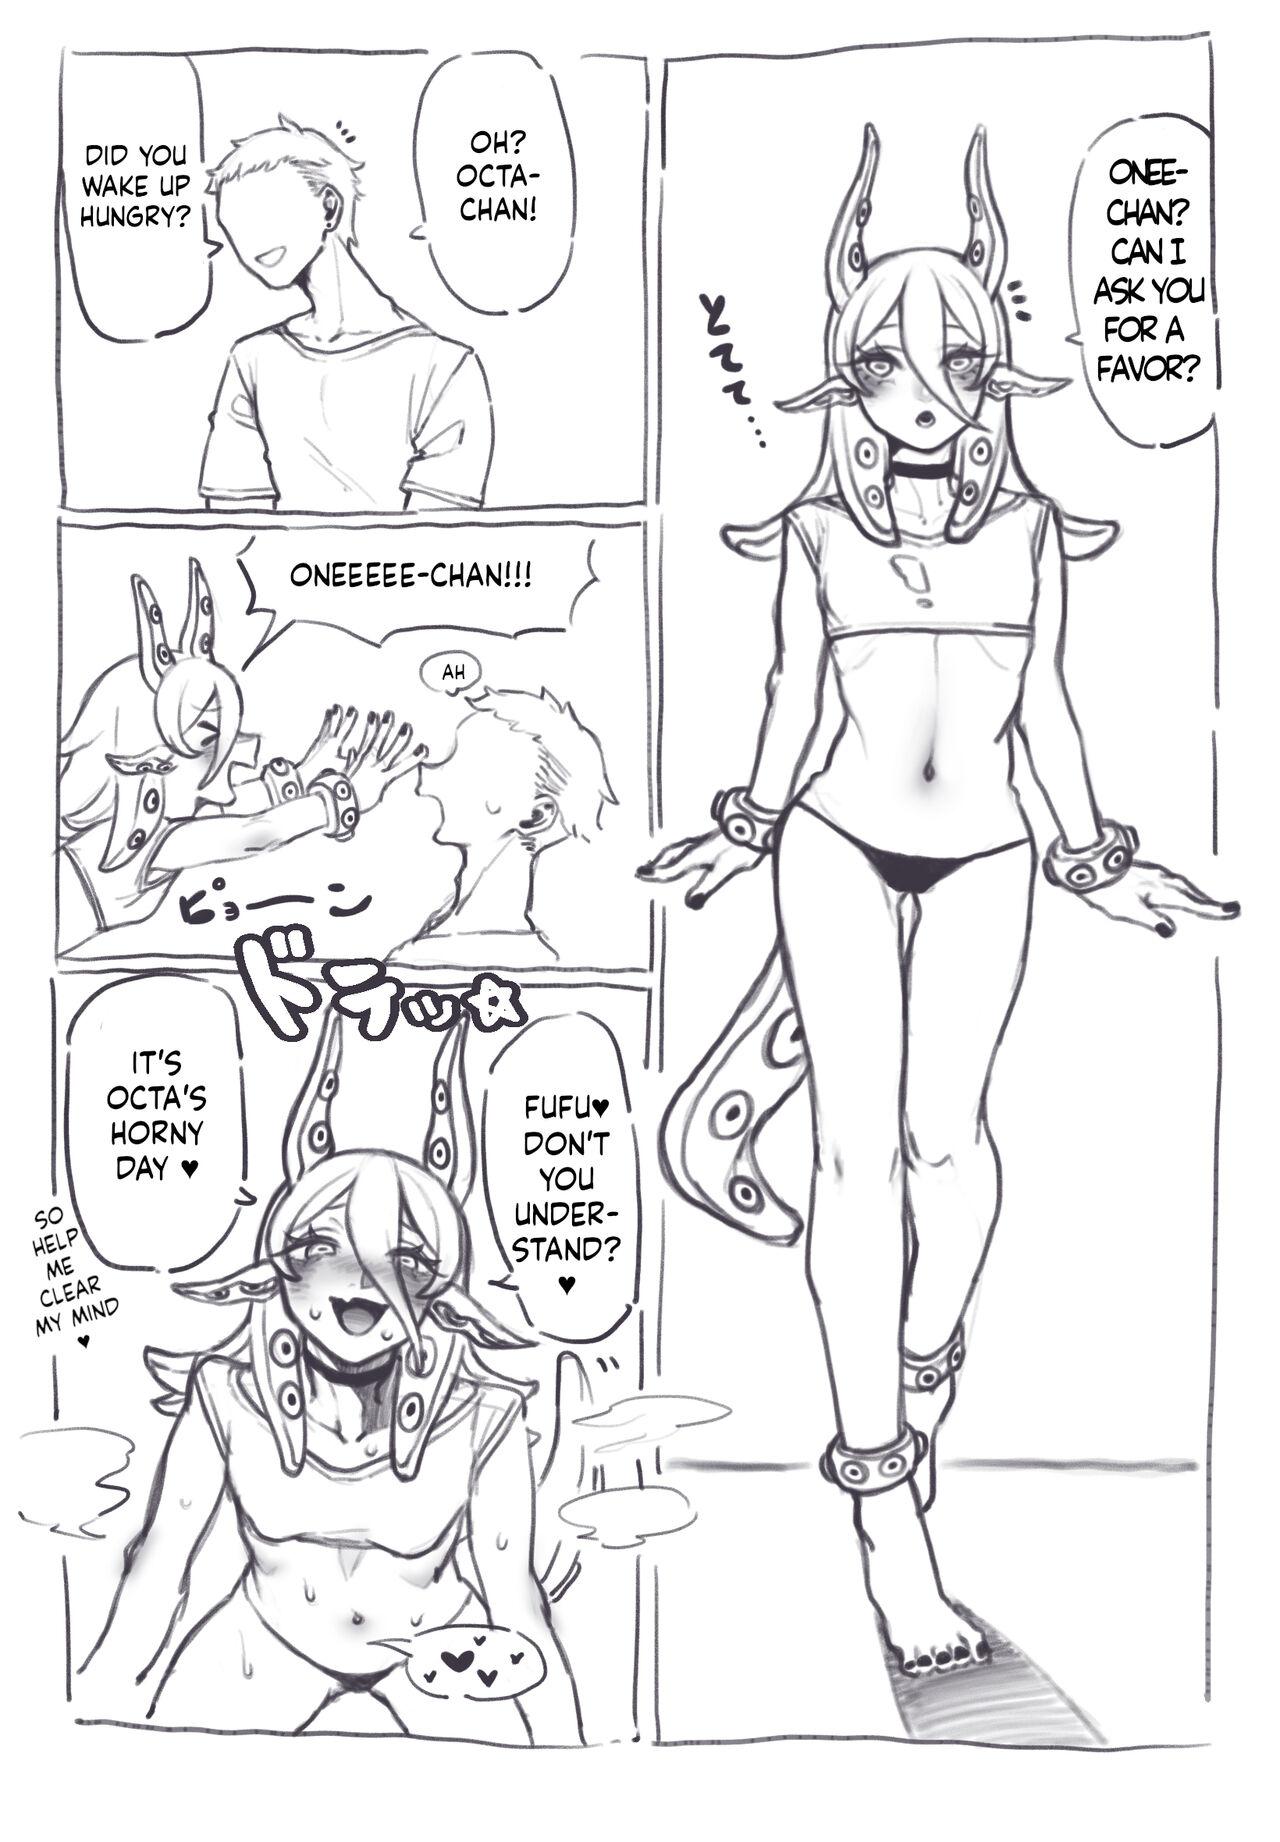 Hot Milf オクタちゃんとえつ するだけの漫画 Gay Toys - Picture 2